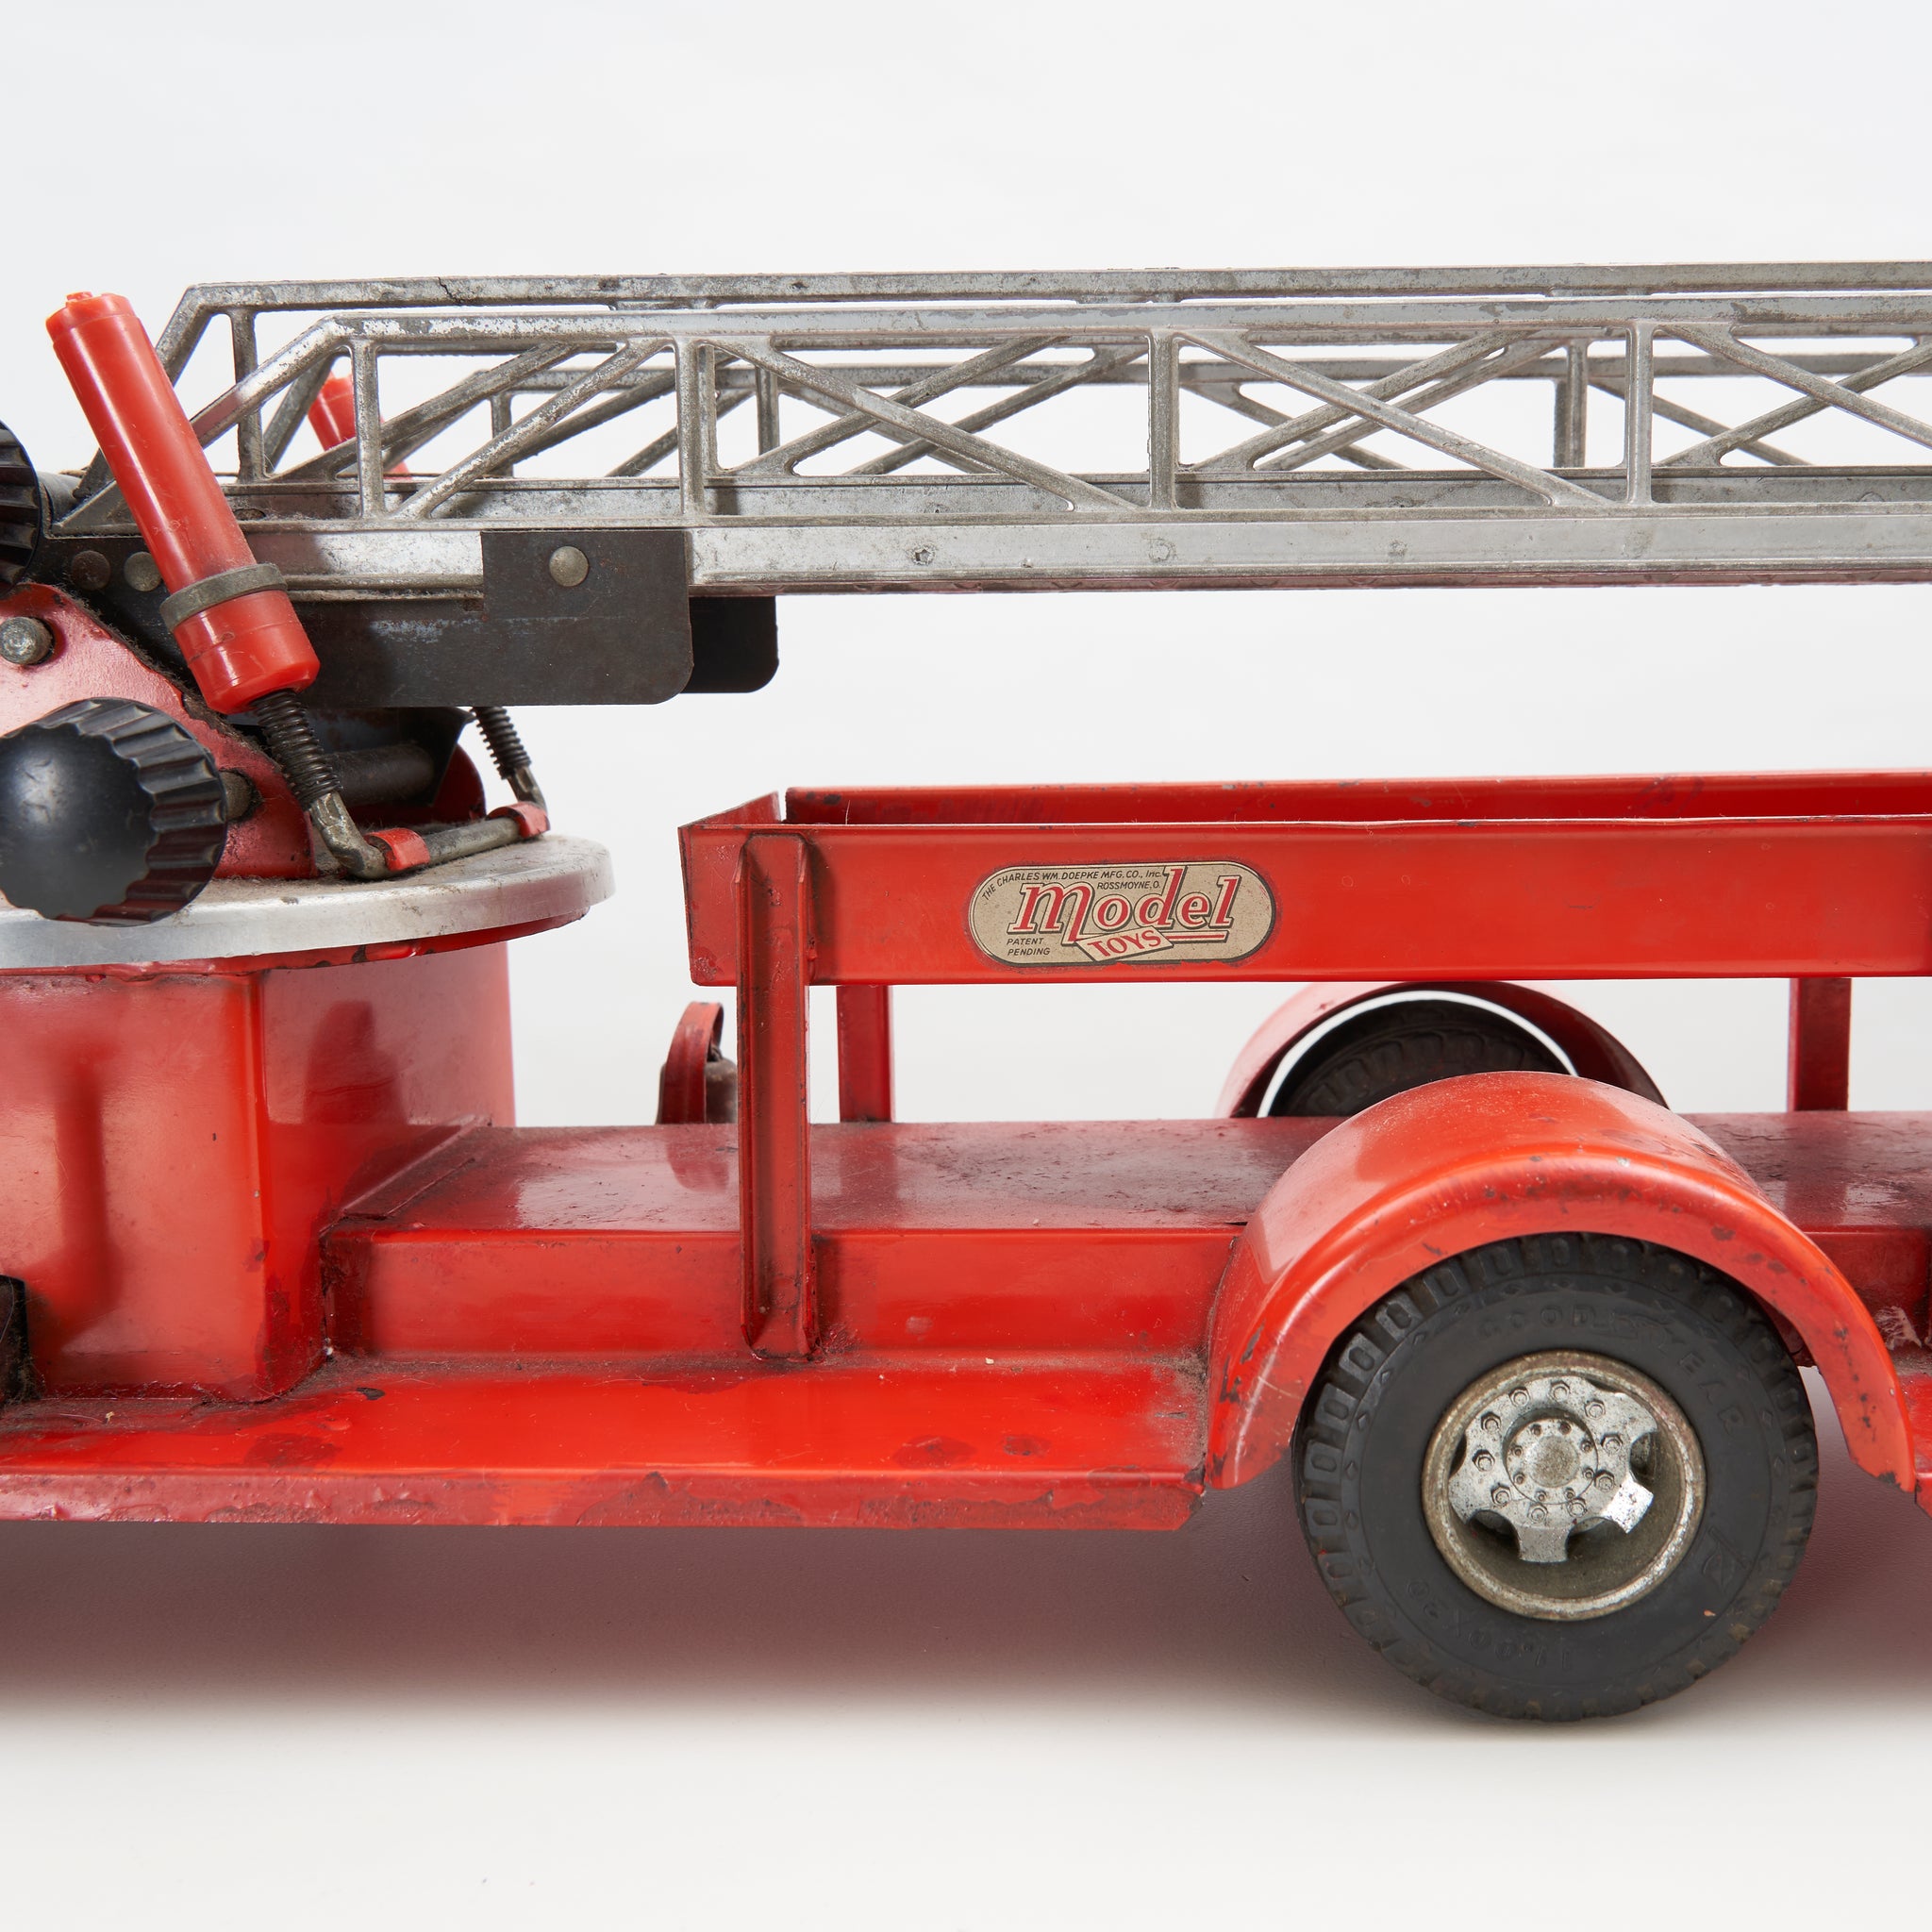 Vintage Fire Truck Toy w/ Extendable Ladder